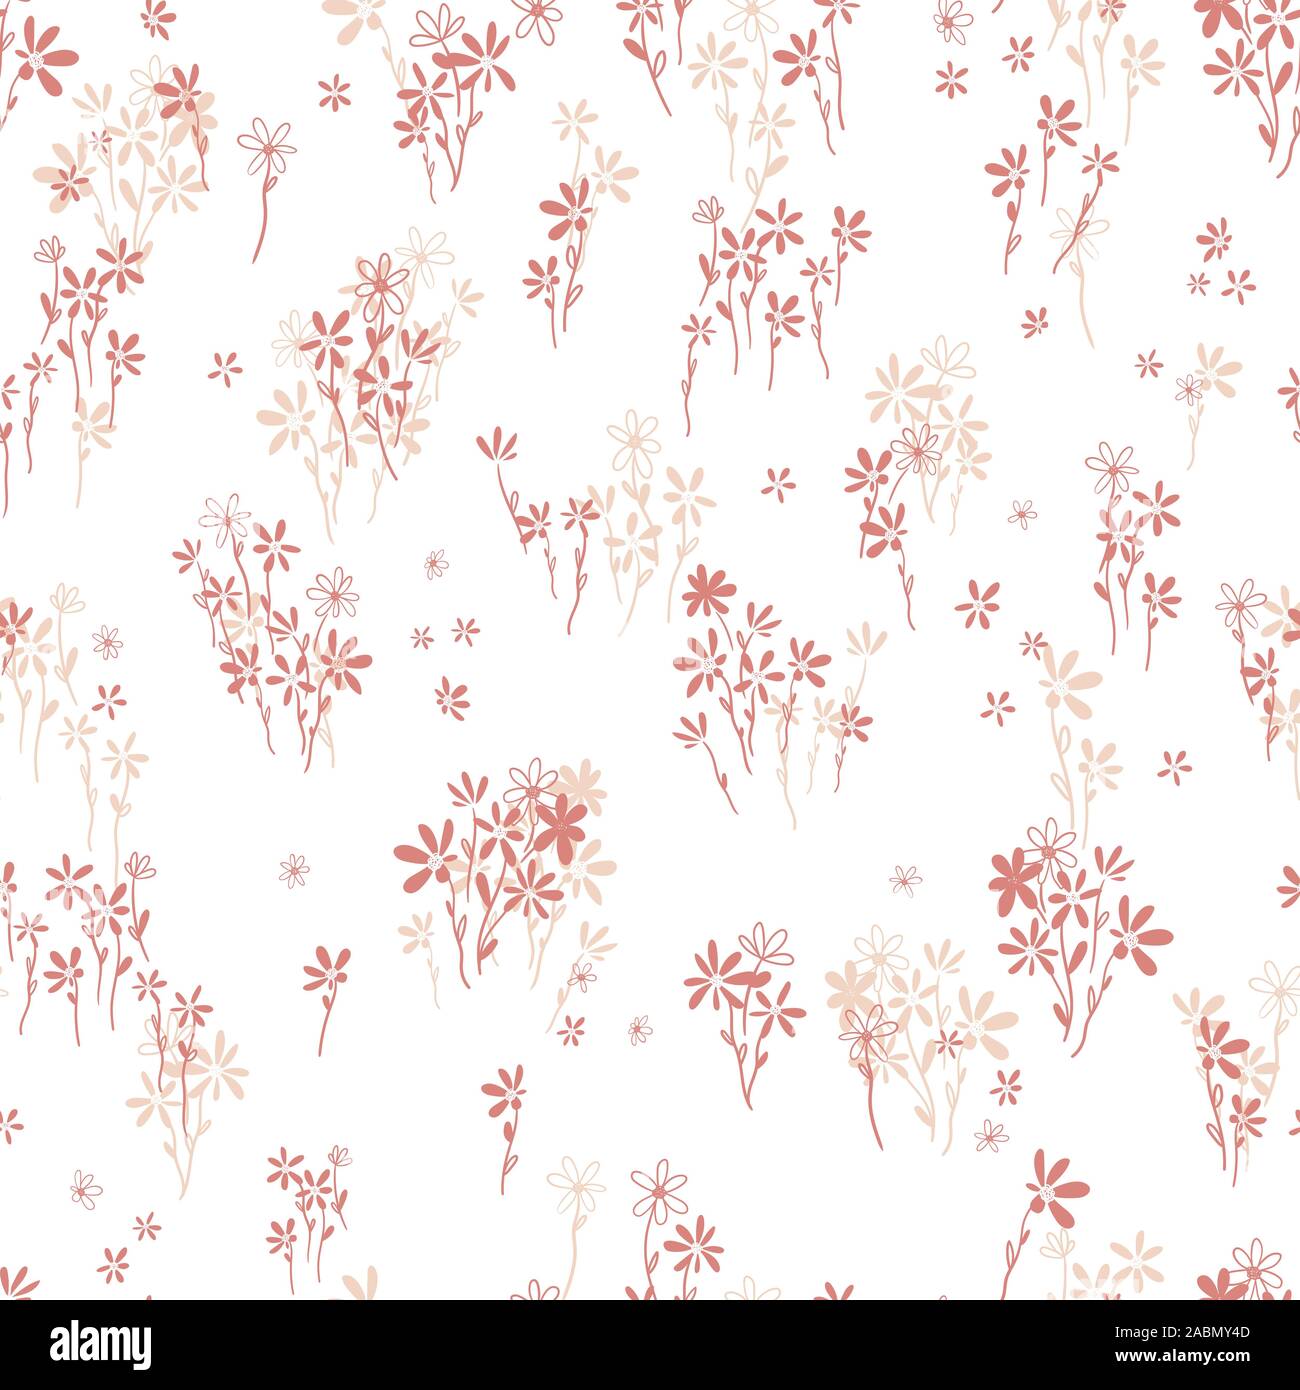 Hand drawn ditsy flower field seamless pattern, cute floral